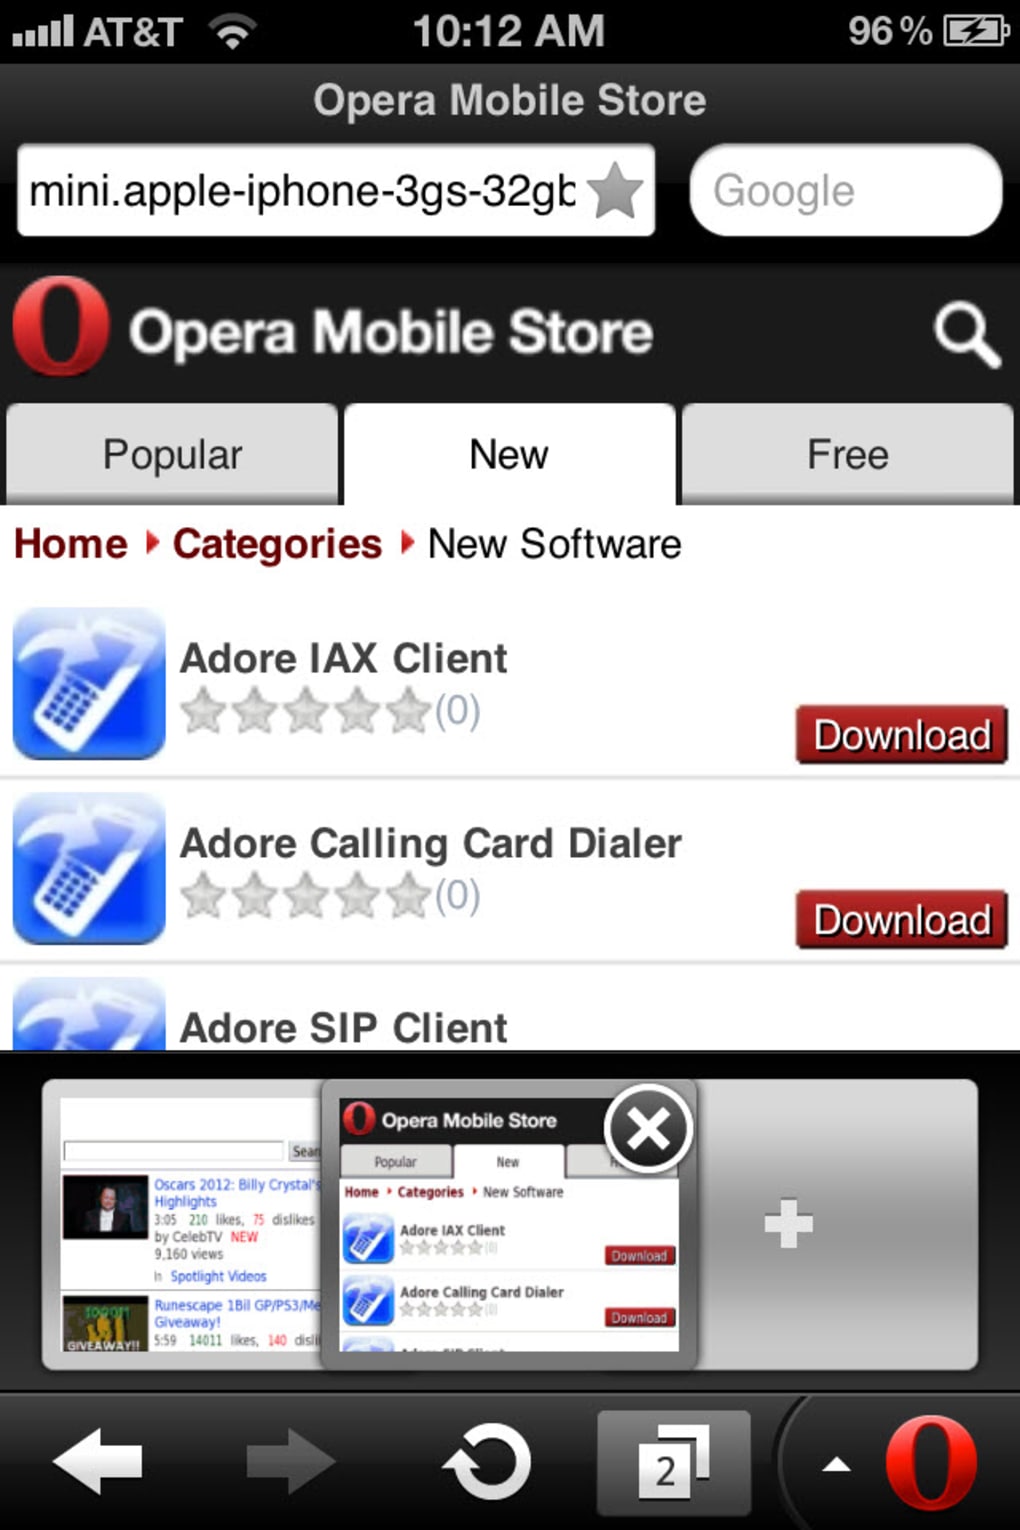 Opera Mini Old Version - Opera Mini For Android Apk Download : This version has wonderful ...